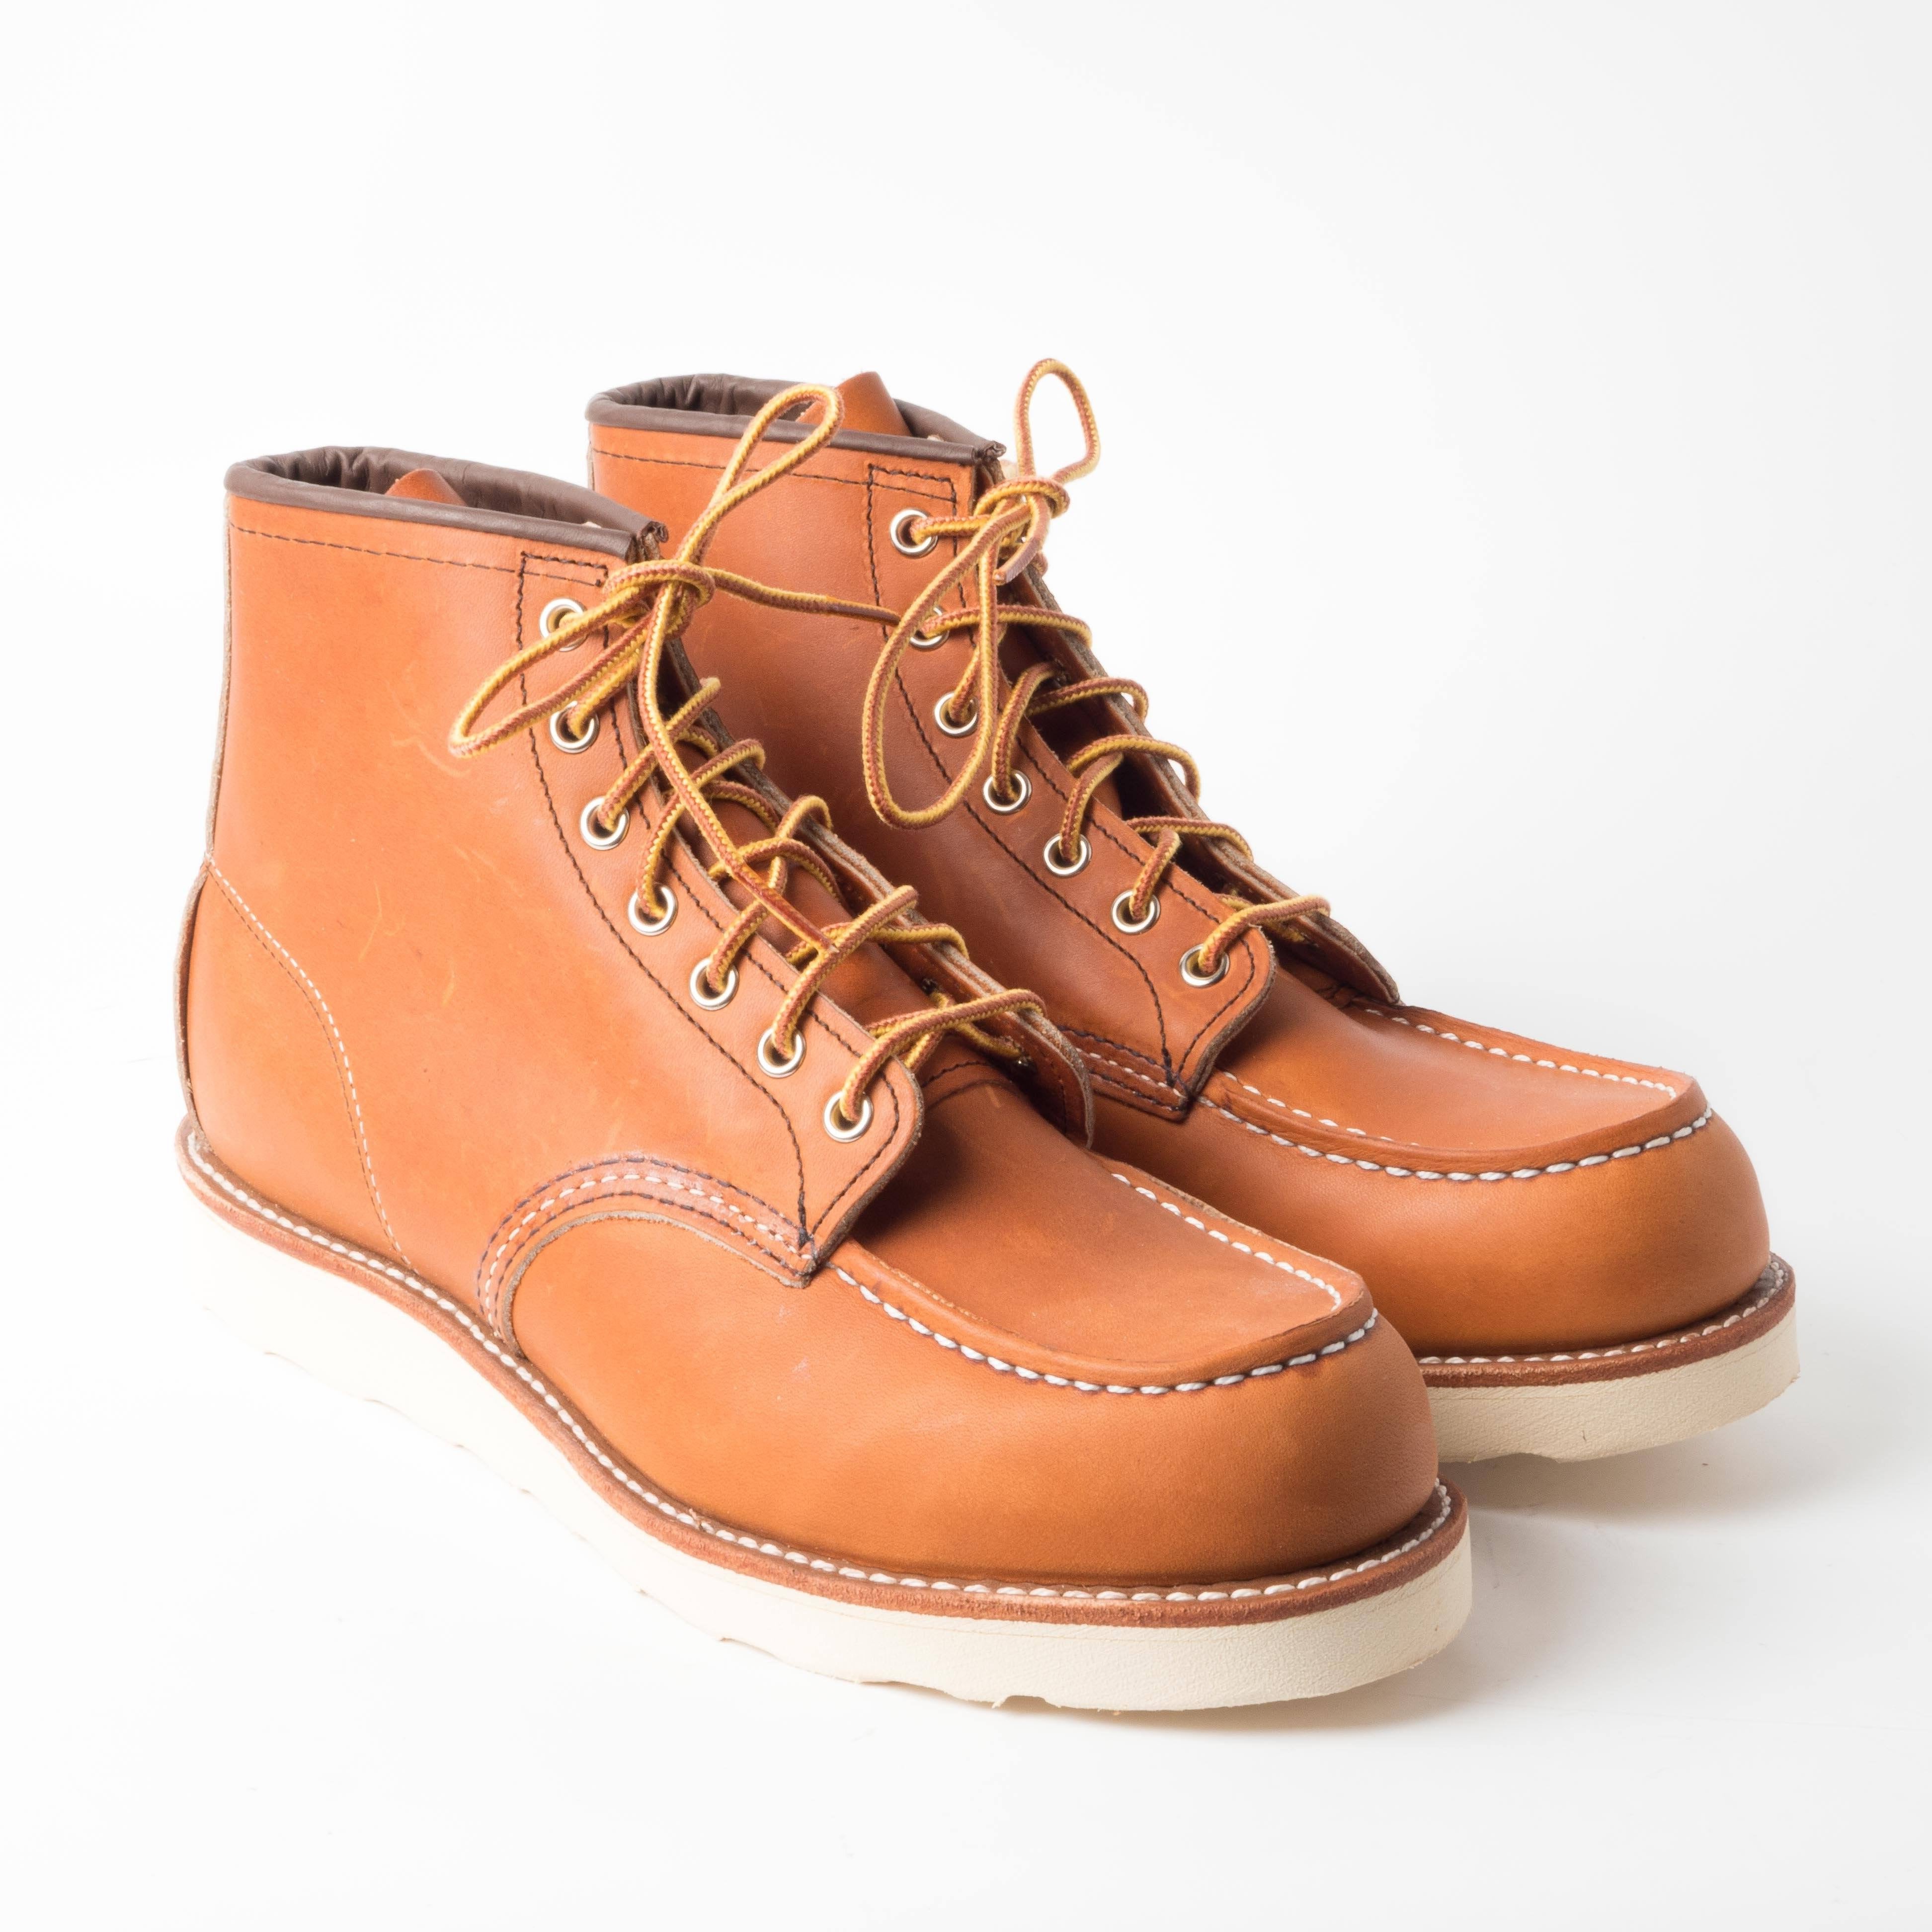 RED WING - AI 2018/19 - Classic Moc 875 - Oro Legacy Scarpe Uomo Red Wing Shoes 